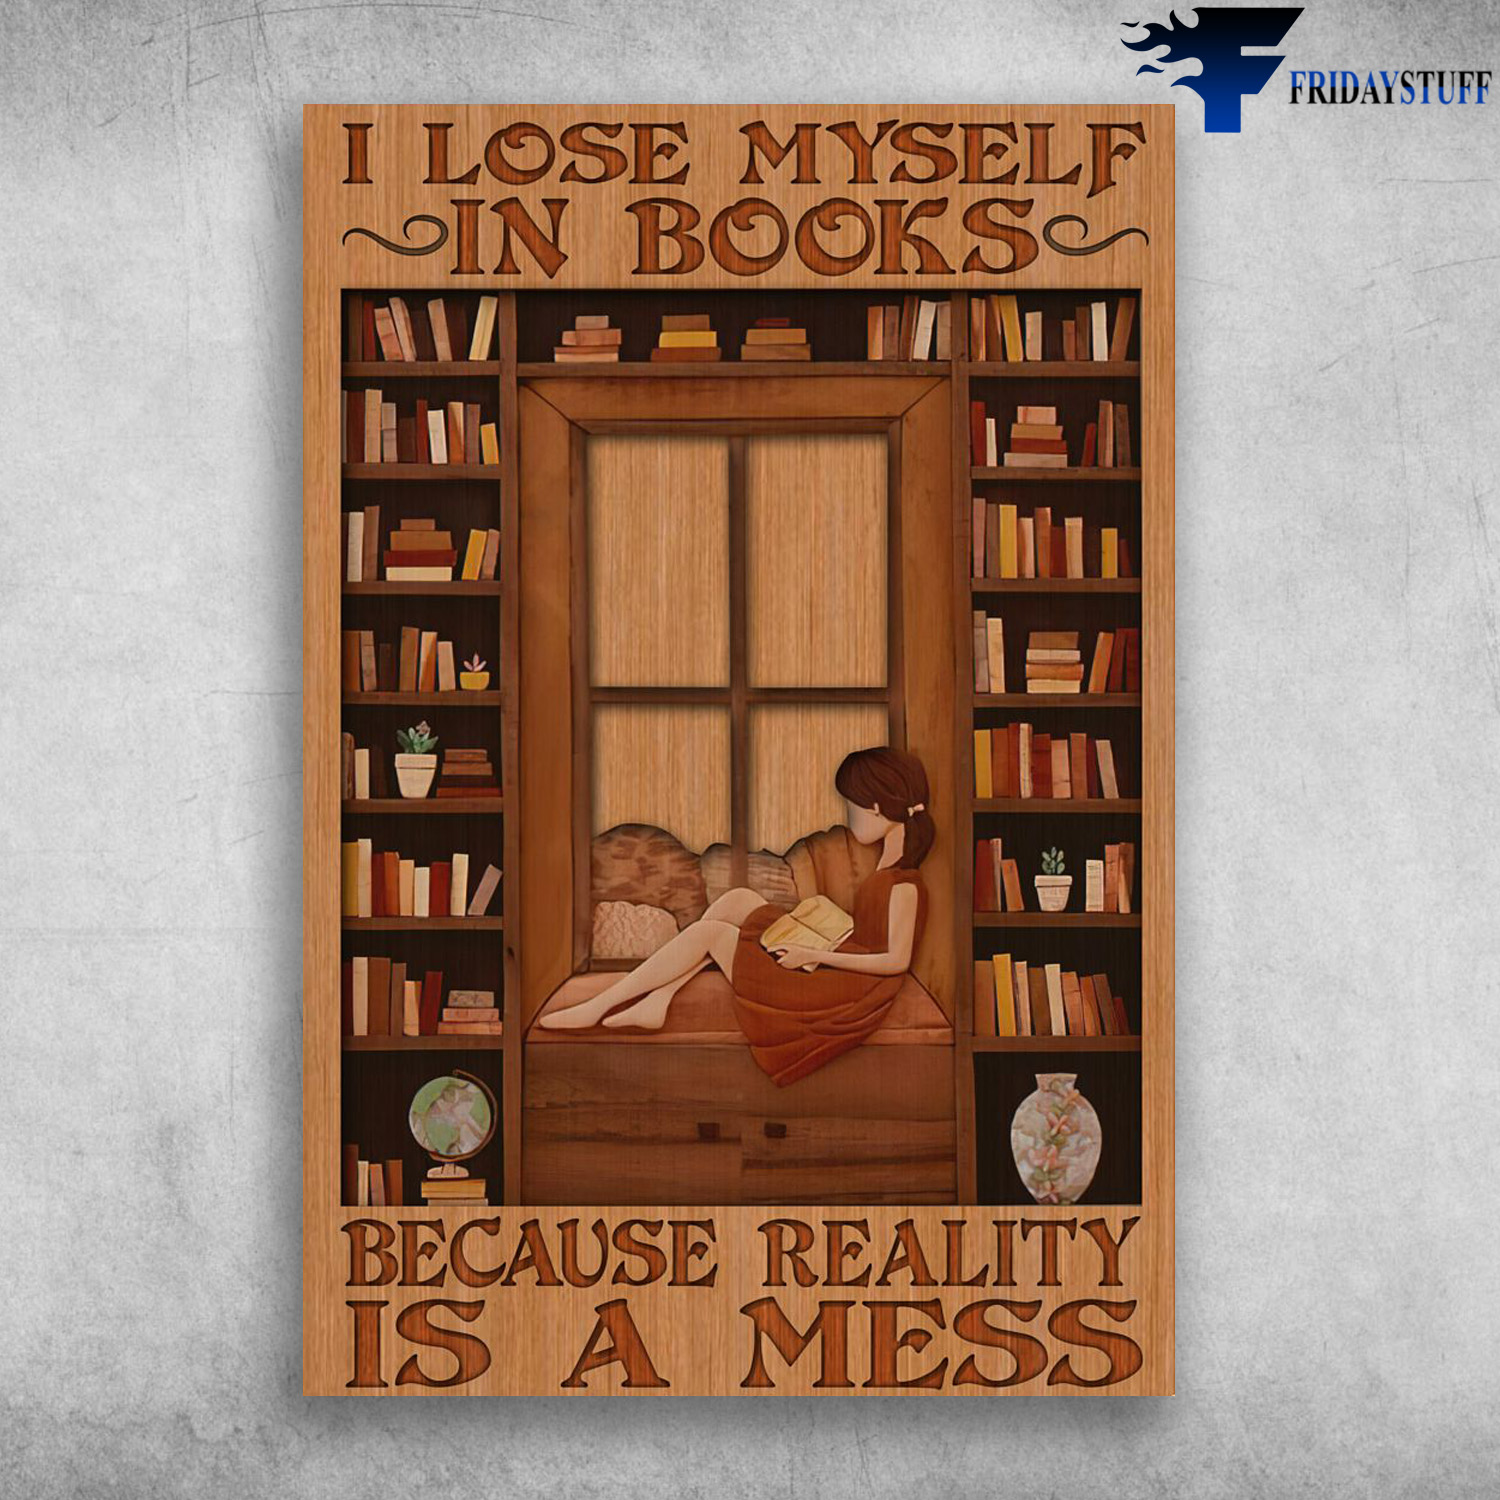 Girl Loves Books In Library - I Lose Myself In Books, Because Reality Is A Mess